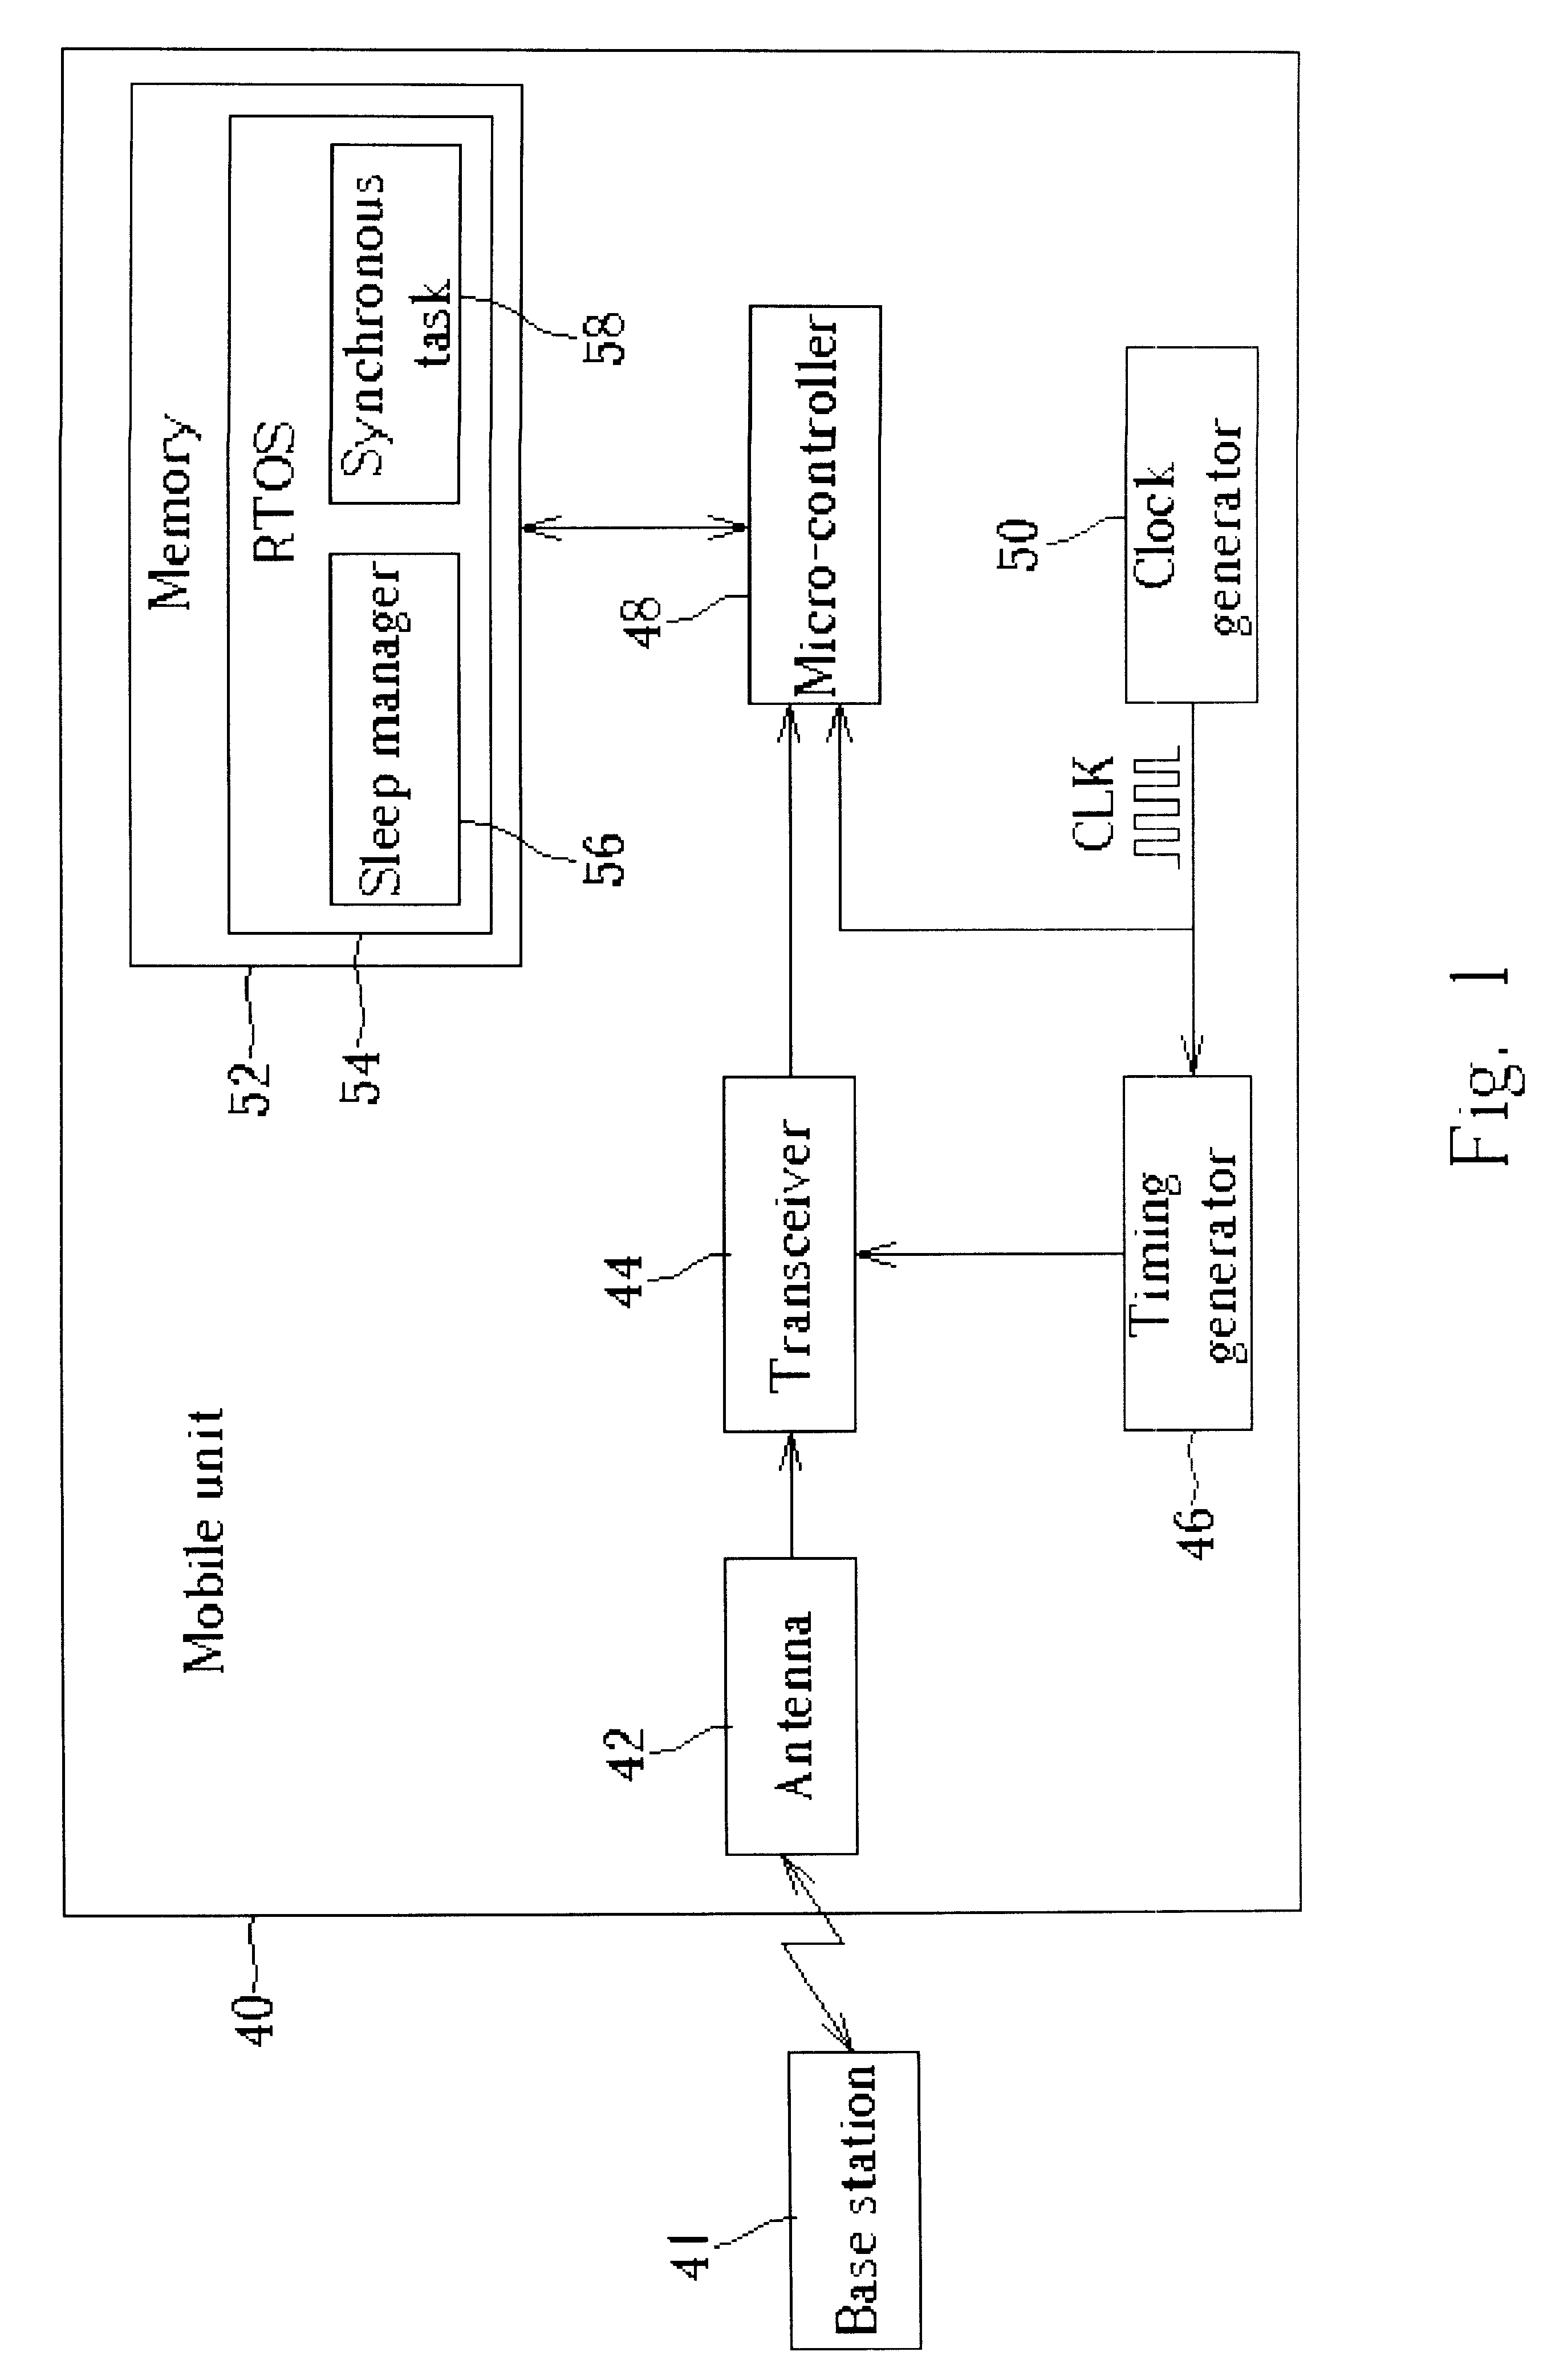 Method for switching a time frame based mobile unit to a sleep mode